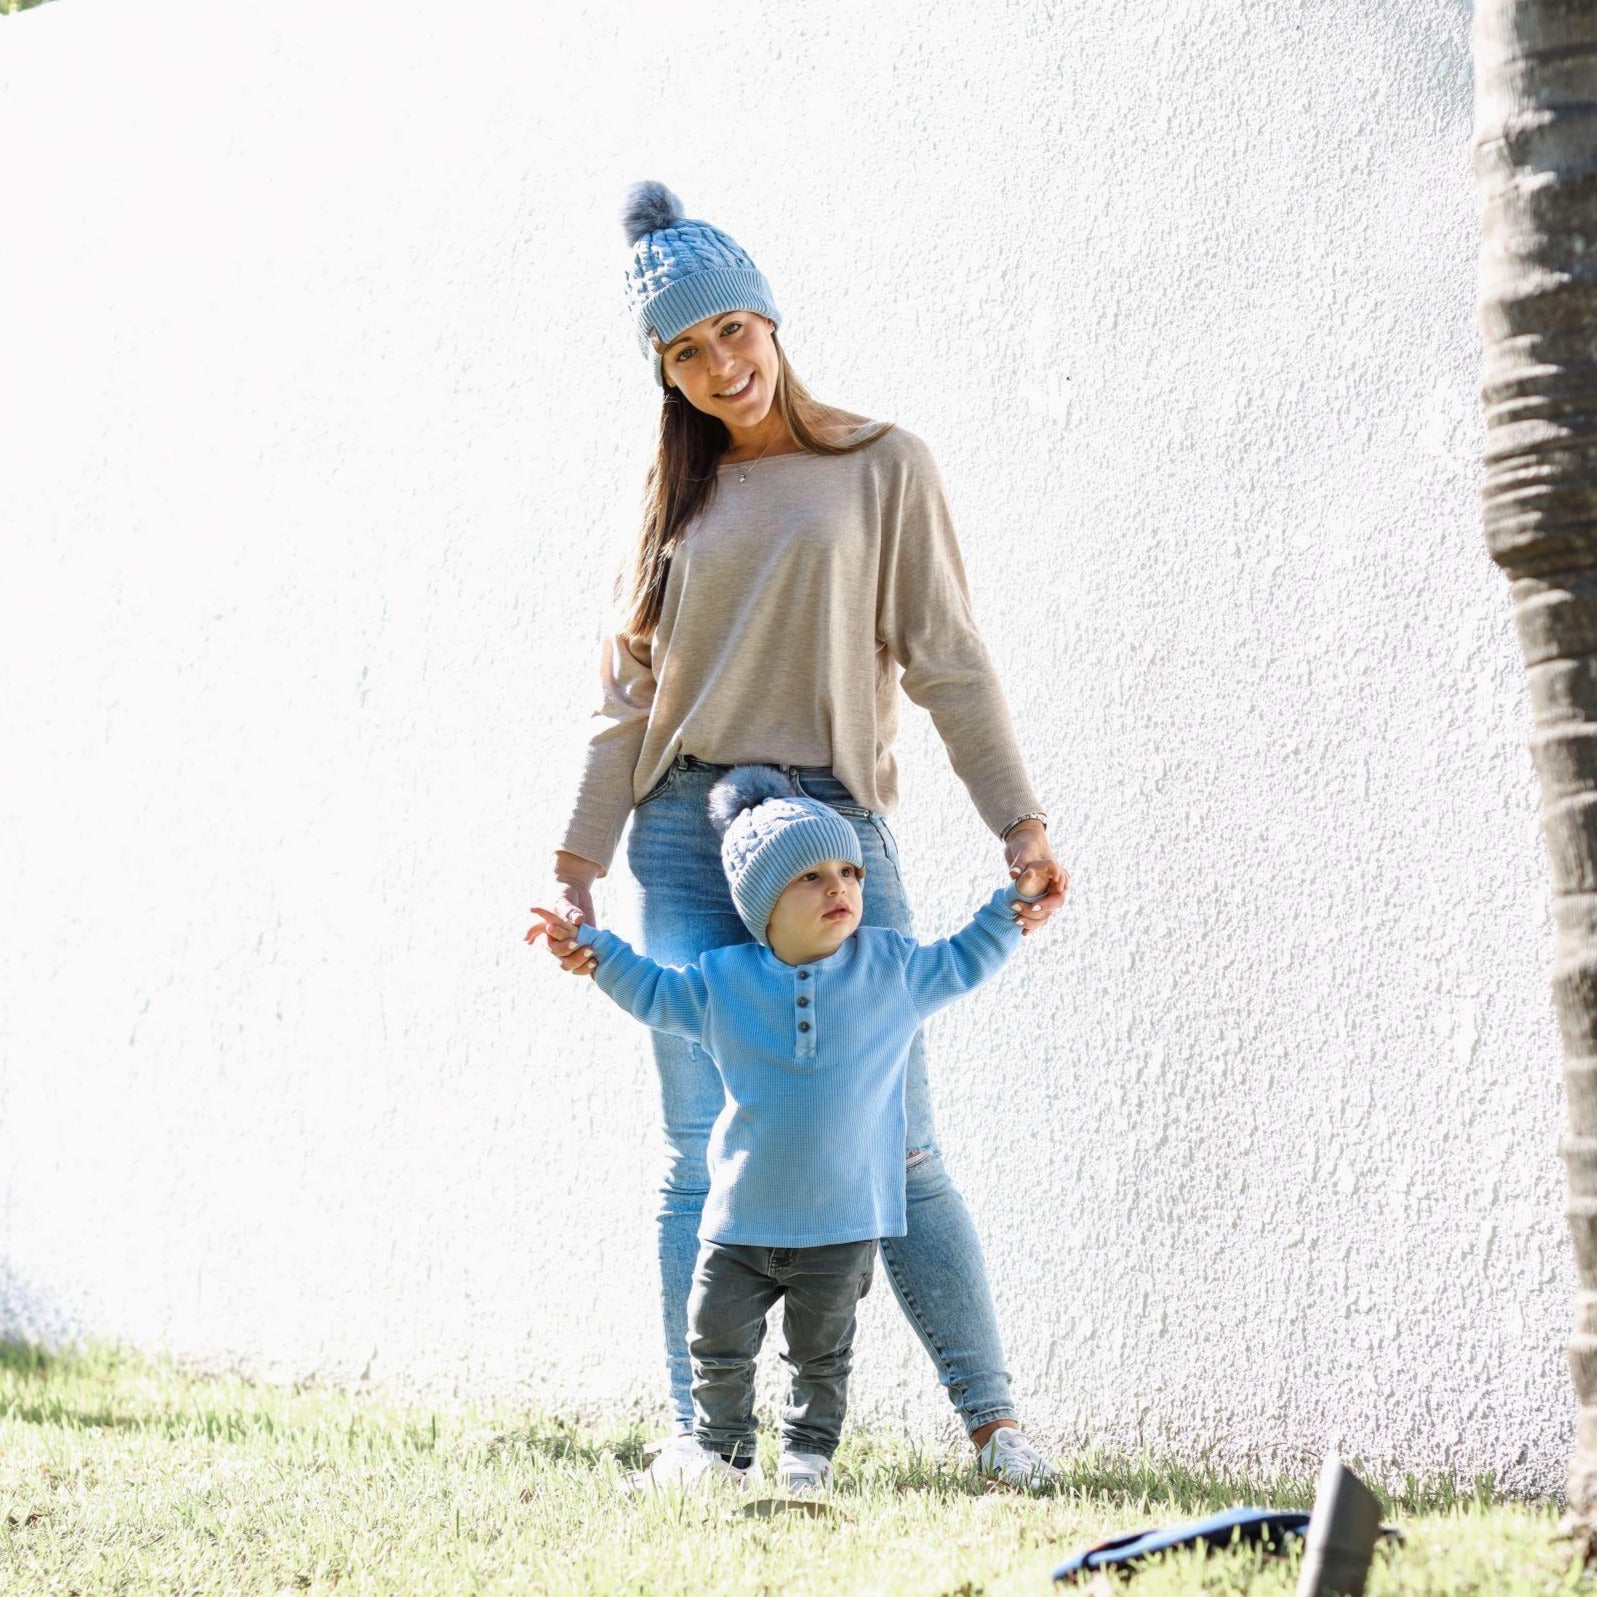 Matching mum and kid blue winter cotton beanie with pom pom. Cubs & Co. Australia.